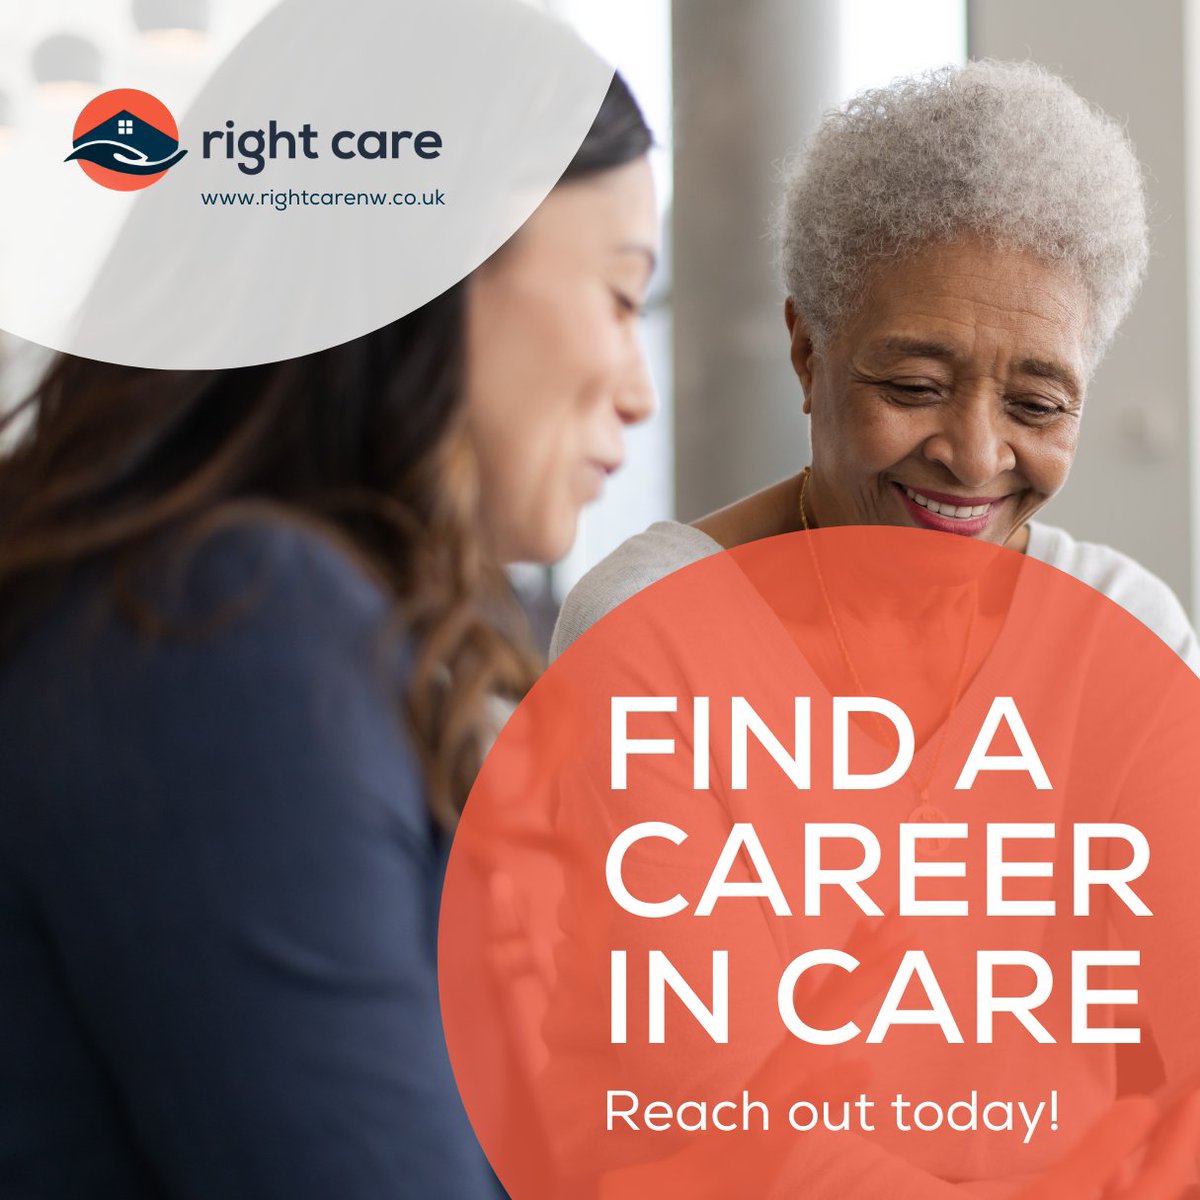 If you’re passionate about caring, we want to hear from you.

✅ Training and care certificate provided
✅ Flexible hours
✅ DBS provided
✅ Excellent pay rates

✉️ careers@rightcarenw.co.uk
☎️ 01204567856 / 01942 252806
🌐 rightcarenw.co.uk

#Hiring #JobsUK #CareerInCare